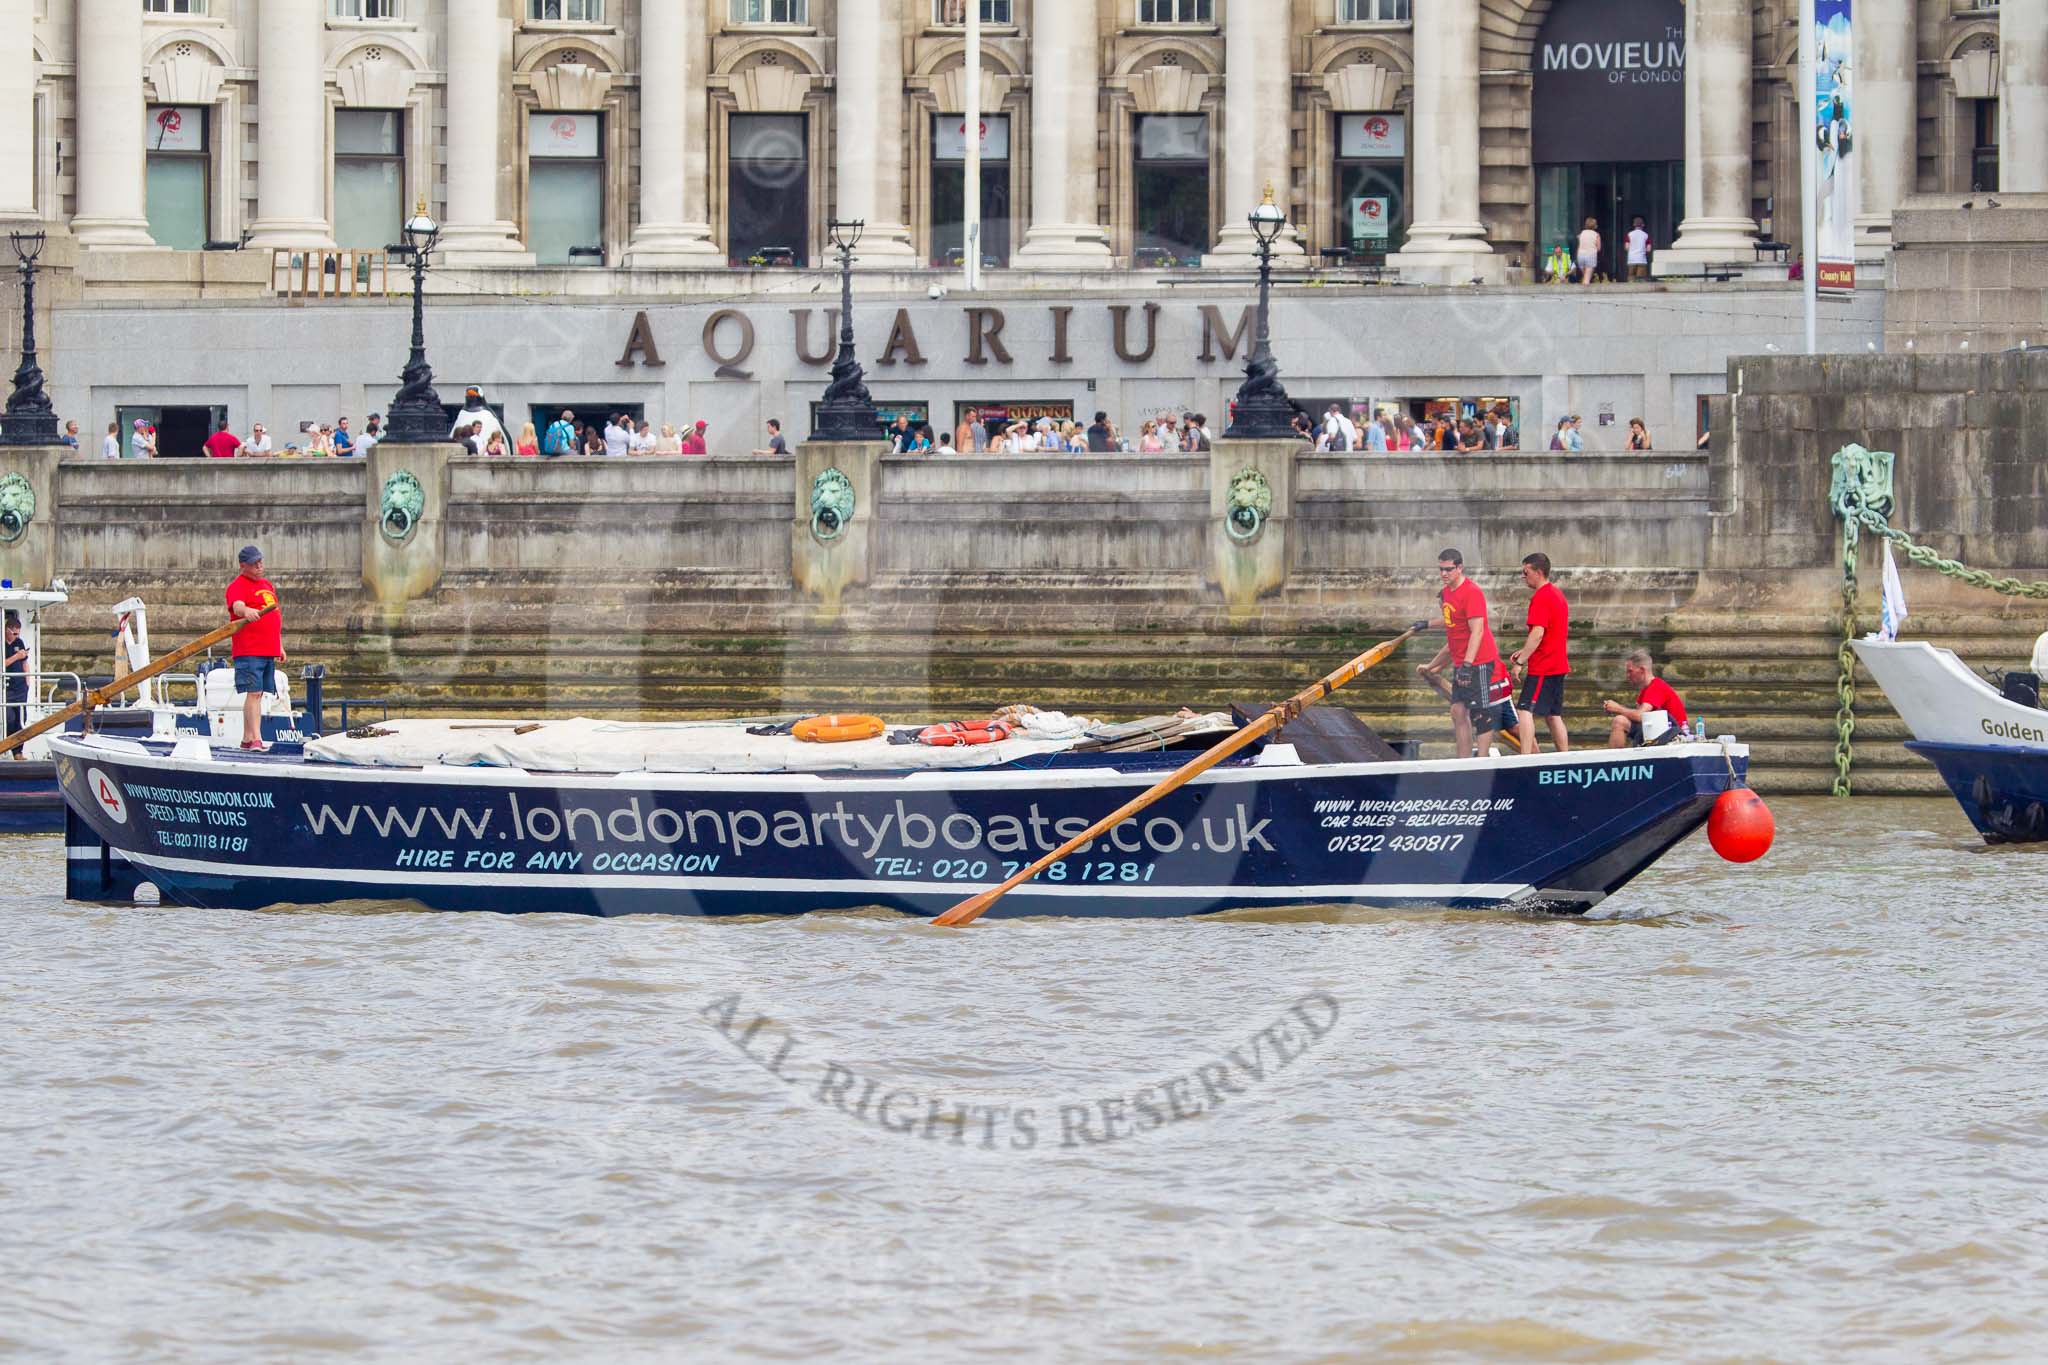 TOW River Thames Barge Driving Race 2013: Barge "Benjamin", by London Party Boats, at the London Aquarium, close to the finish of the race at Westminster Bridge..
River Thames between Greenwich and Westminster,
London,

United Kingdom,
on 13 July 2013 at 14:19, image #433